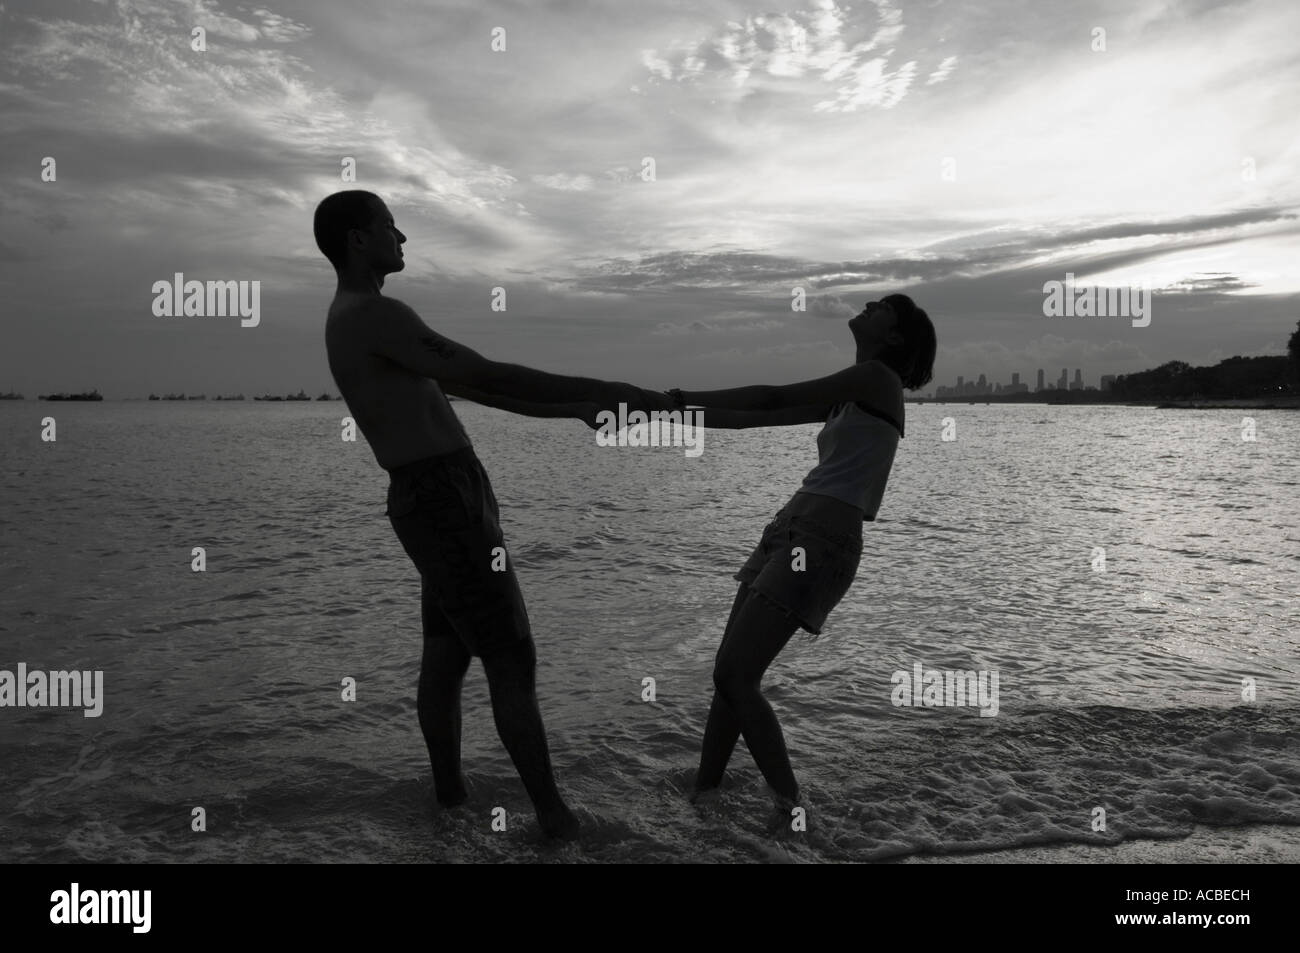 Silhouette d'un couple holding hands and standing on the beach Banque D'Images